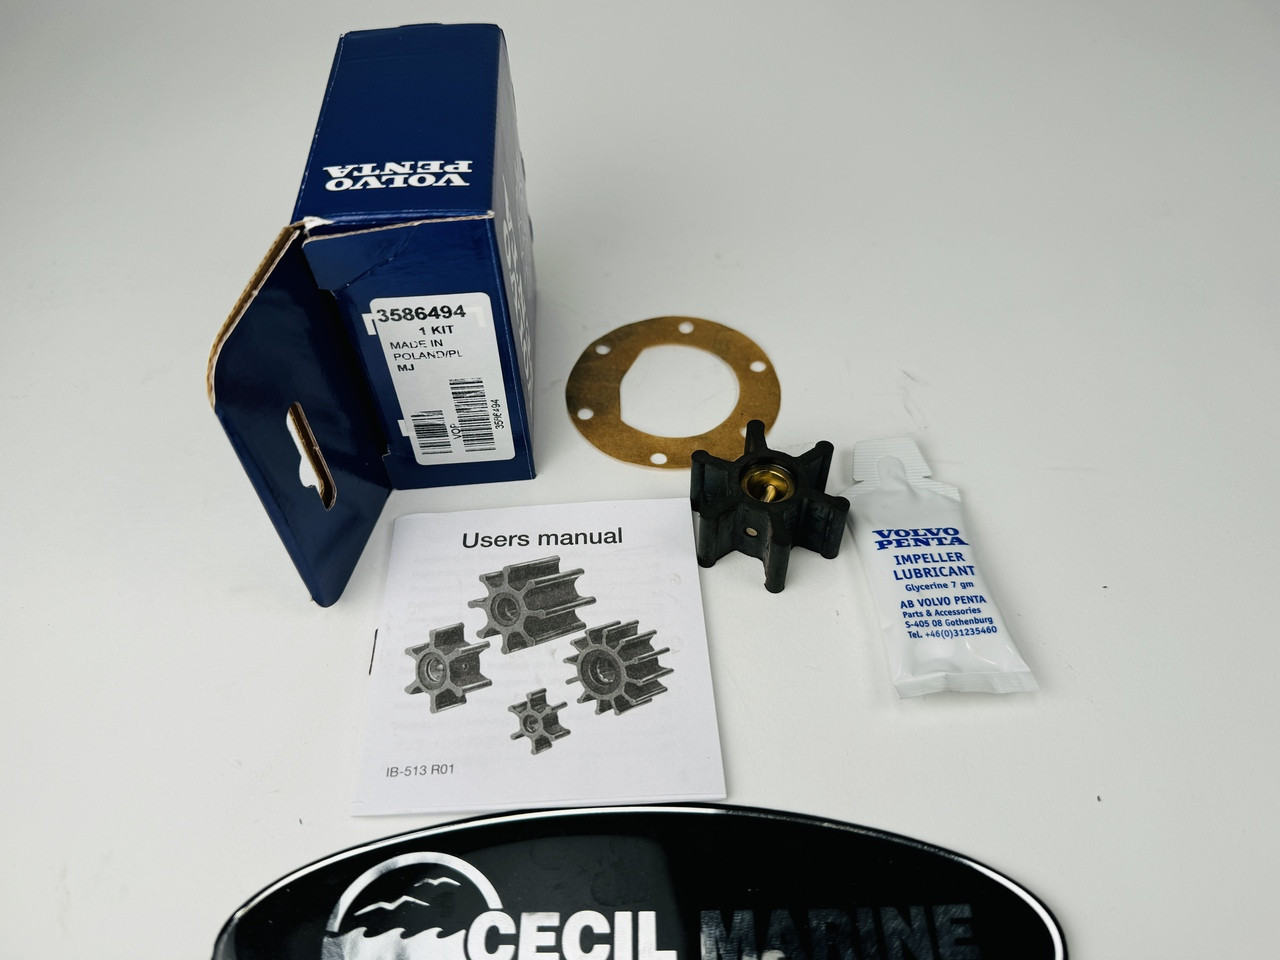 $38.99* GENUINE VOLVO no tax* IMPELLER KIT 3586494 *In Stock & Ready To Ship!